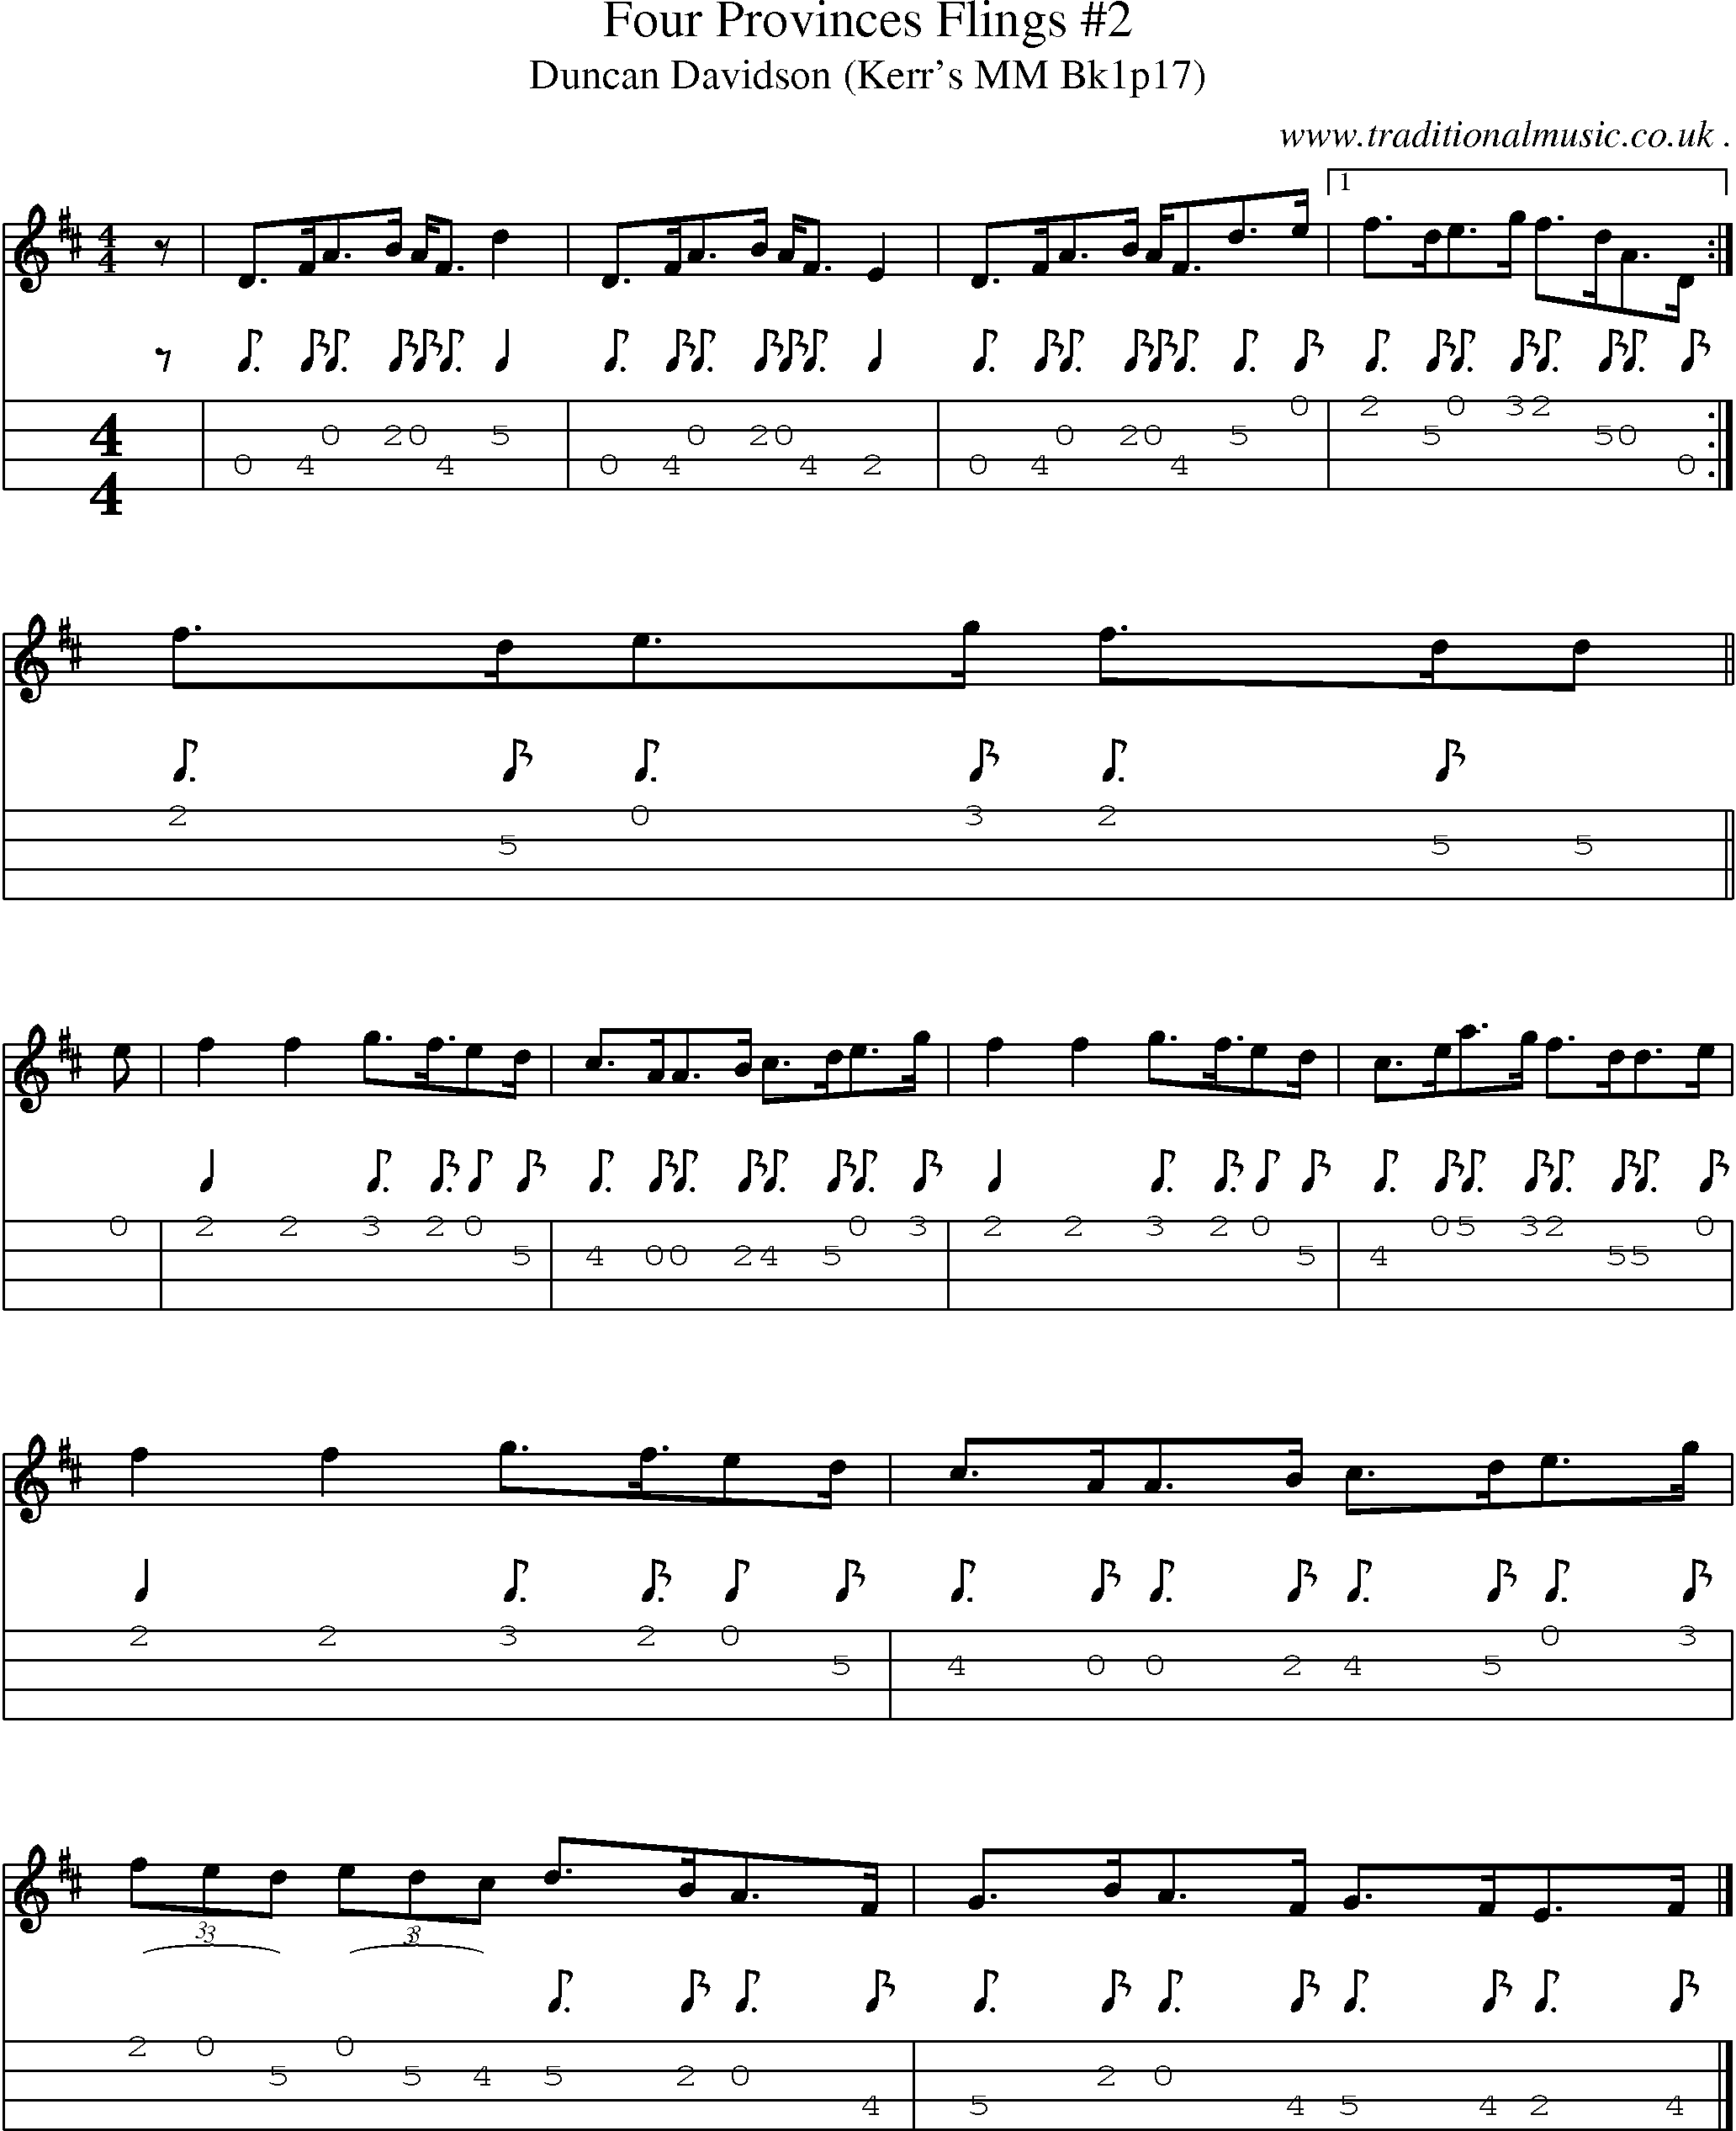 Sheet-music  score, Chords and Mandolin Tabs for Four Provinces Flings 2